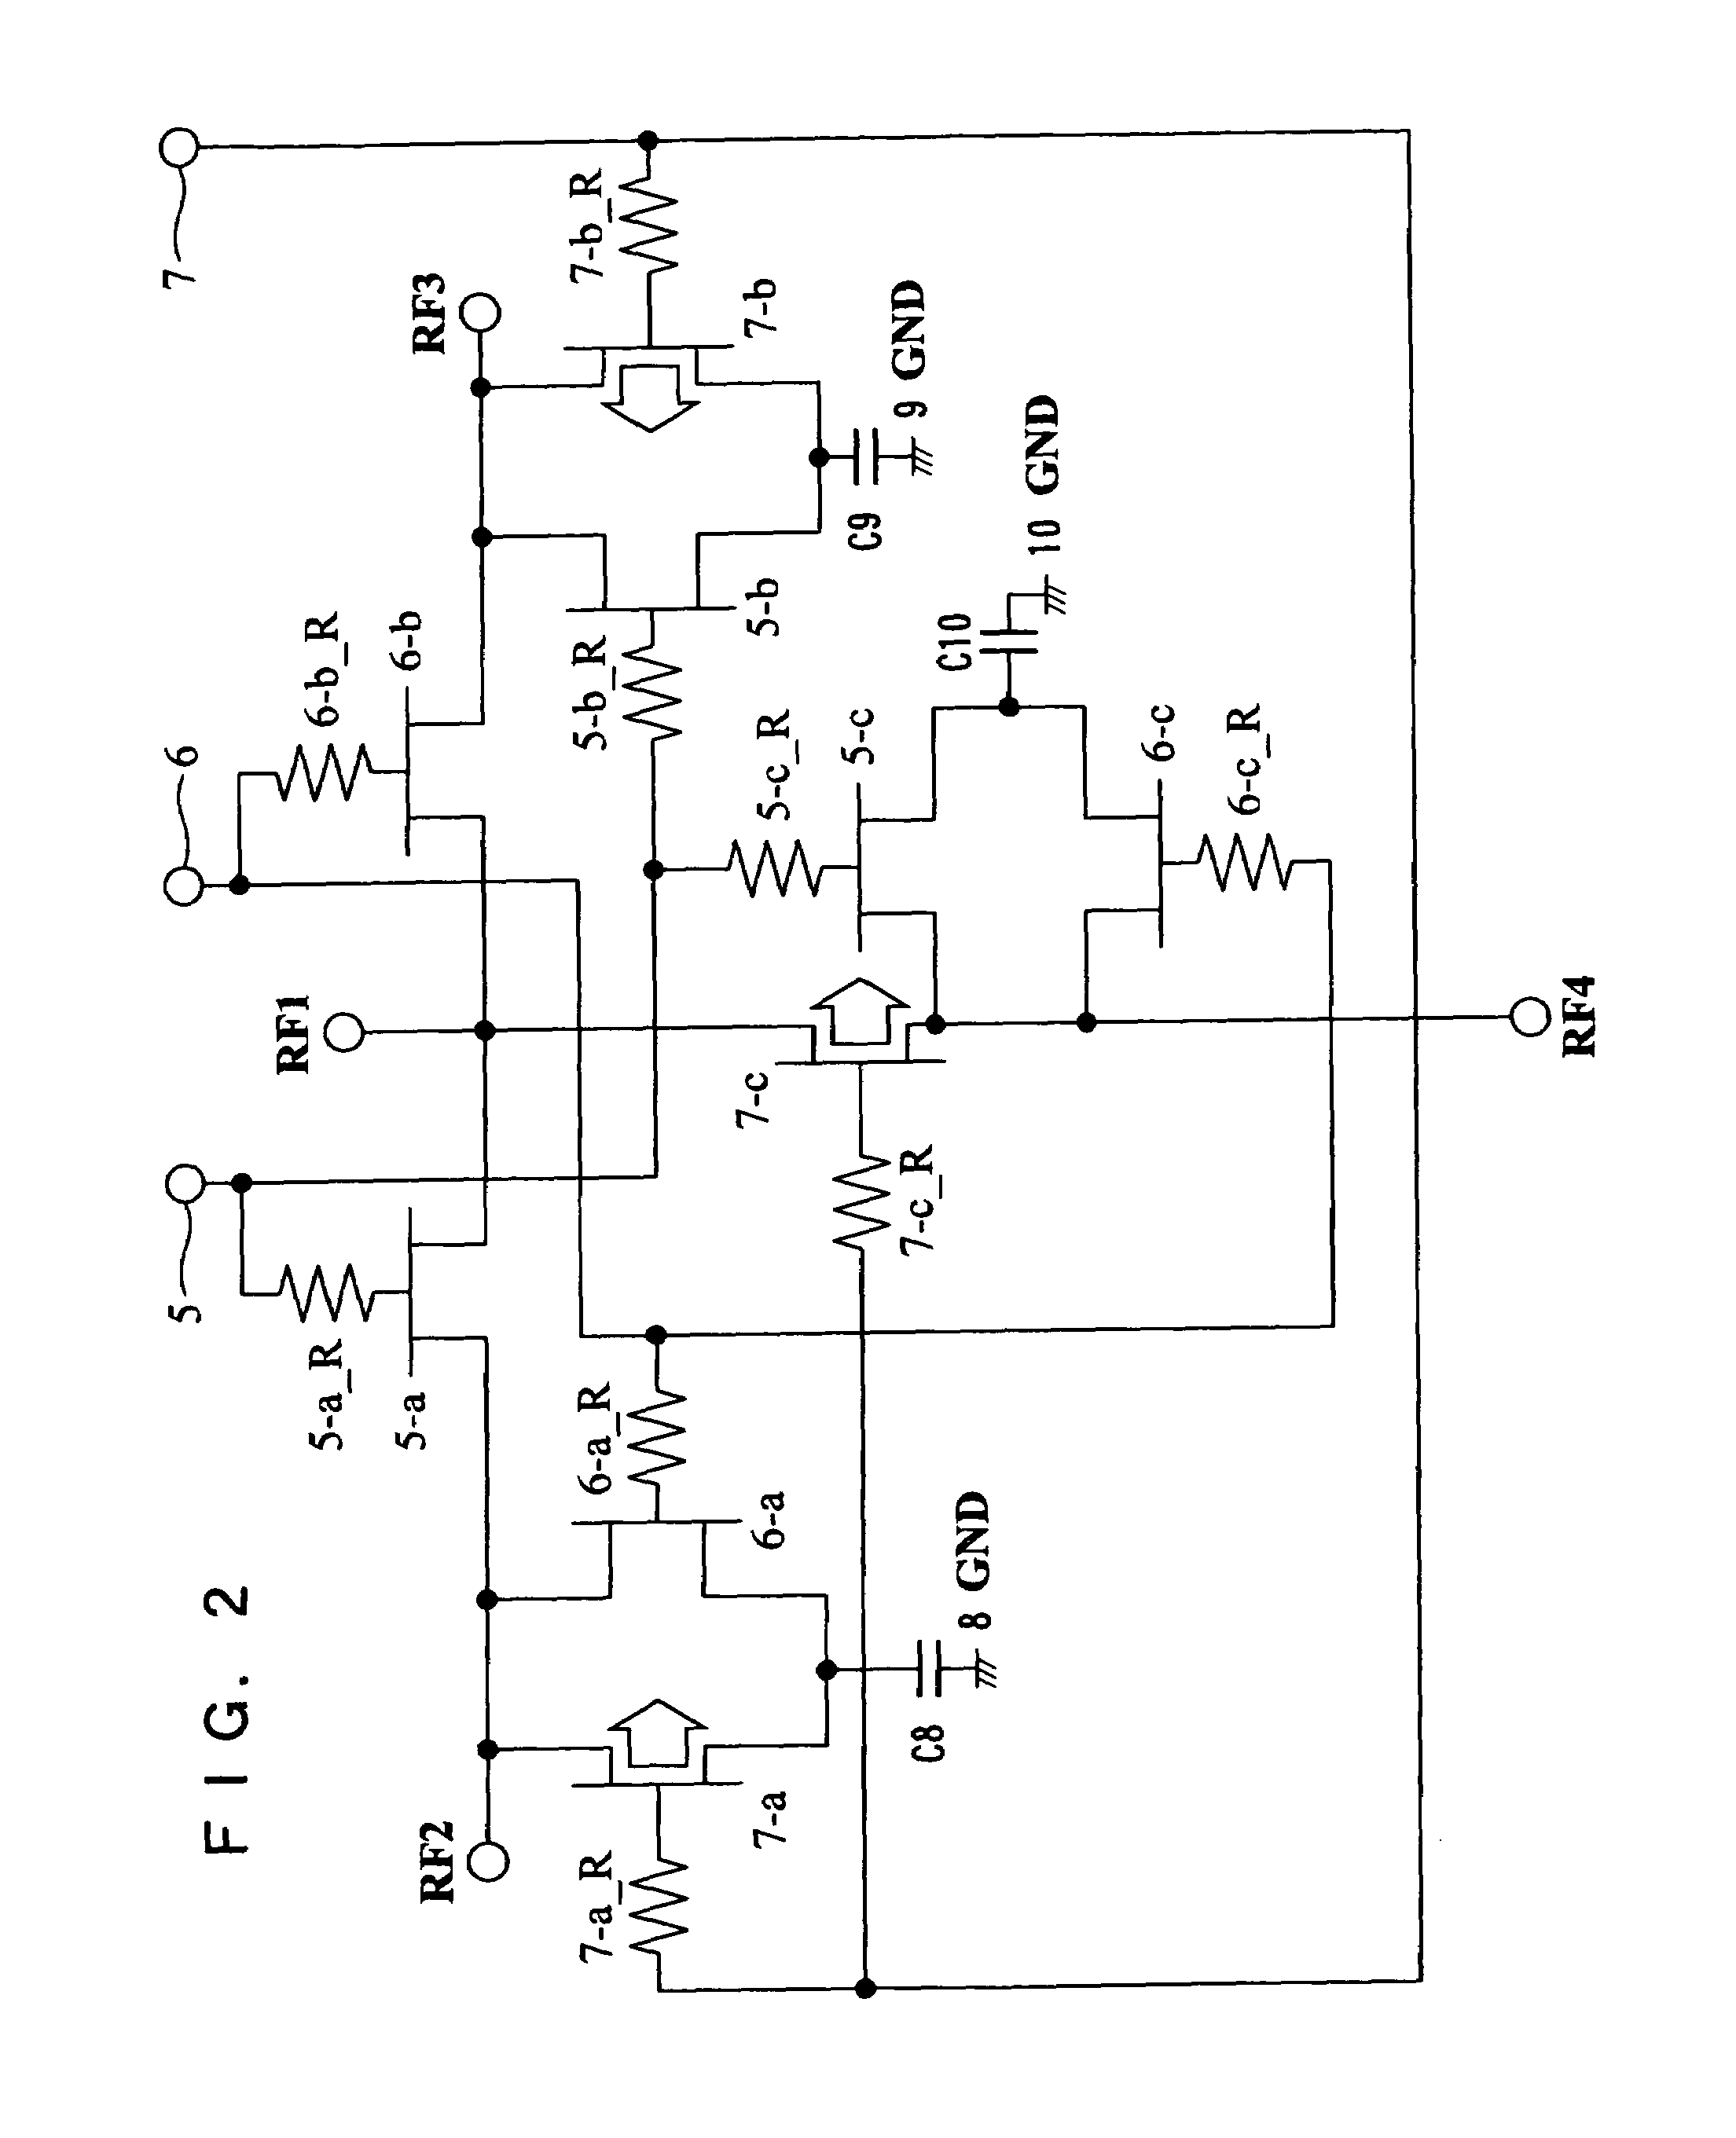 Semiconductor switching circuit for switching the paths of a high frequency signal in a mobile communications unit